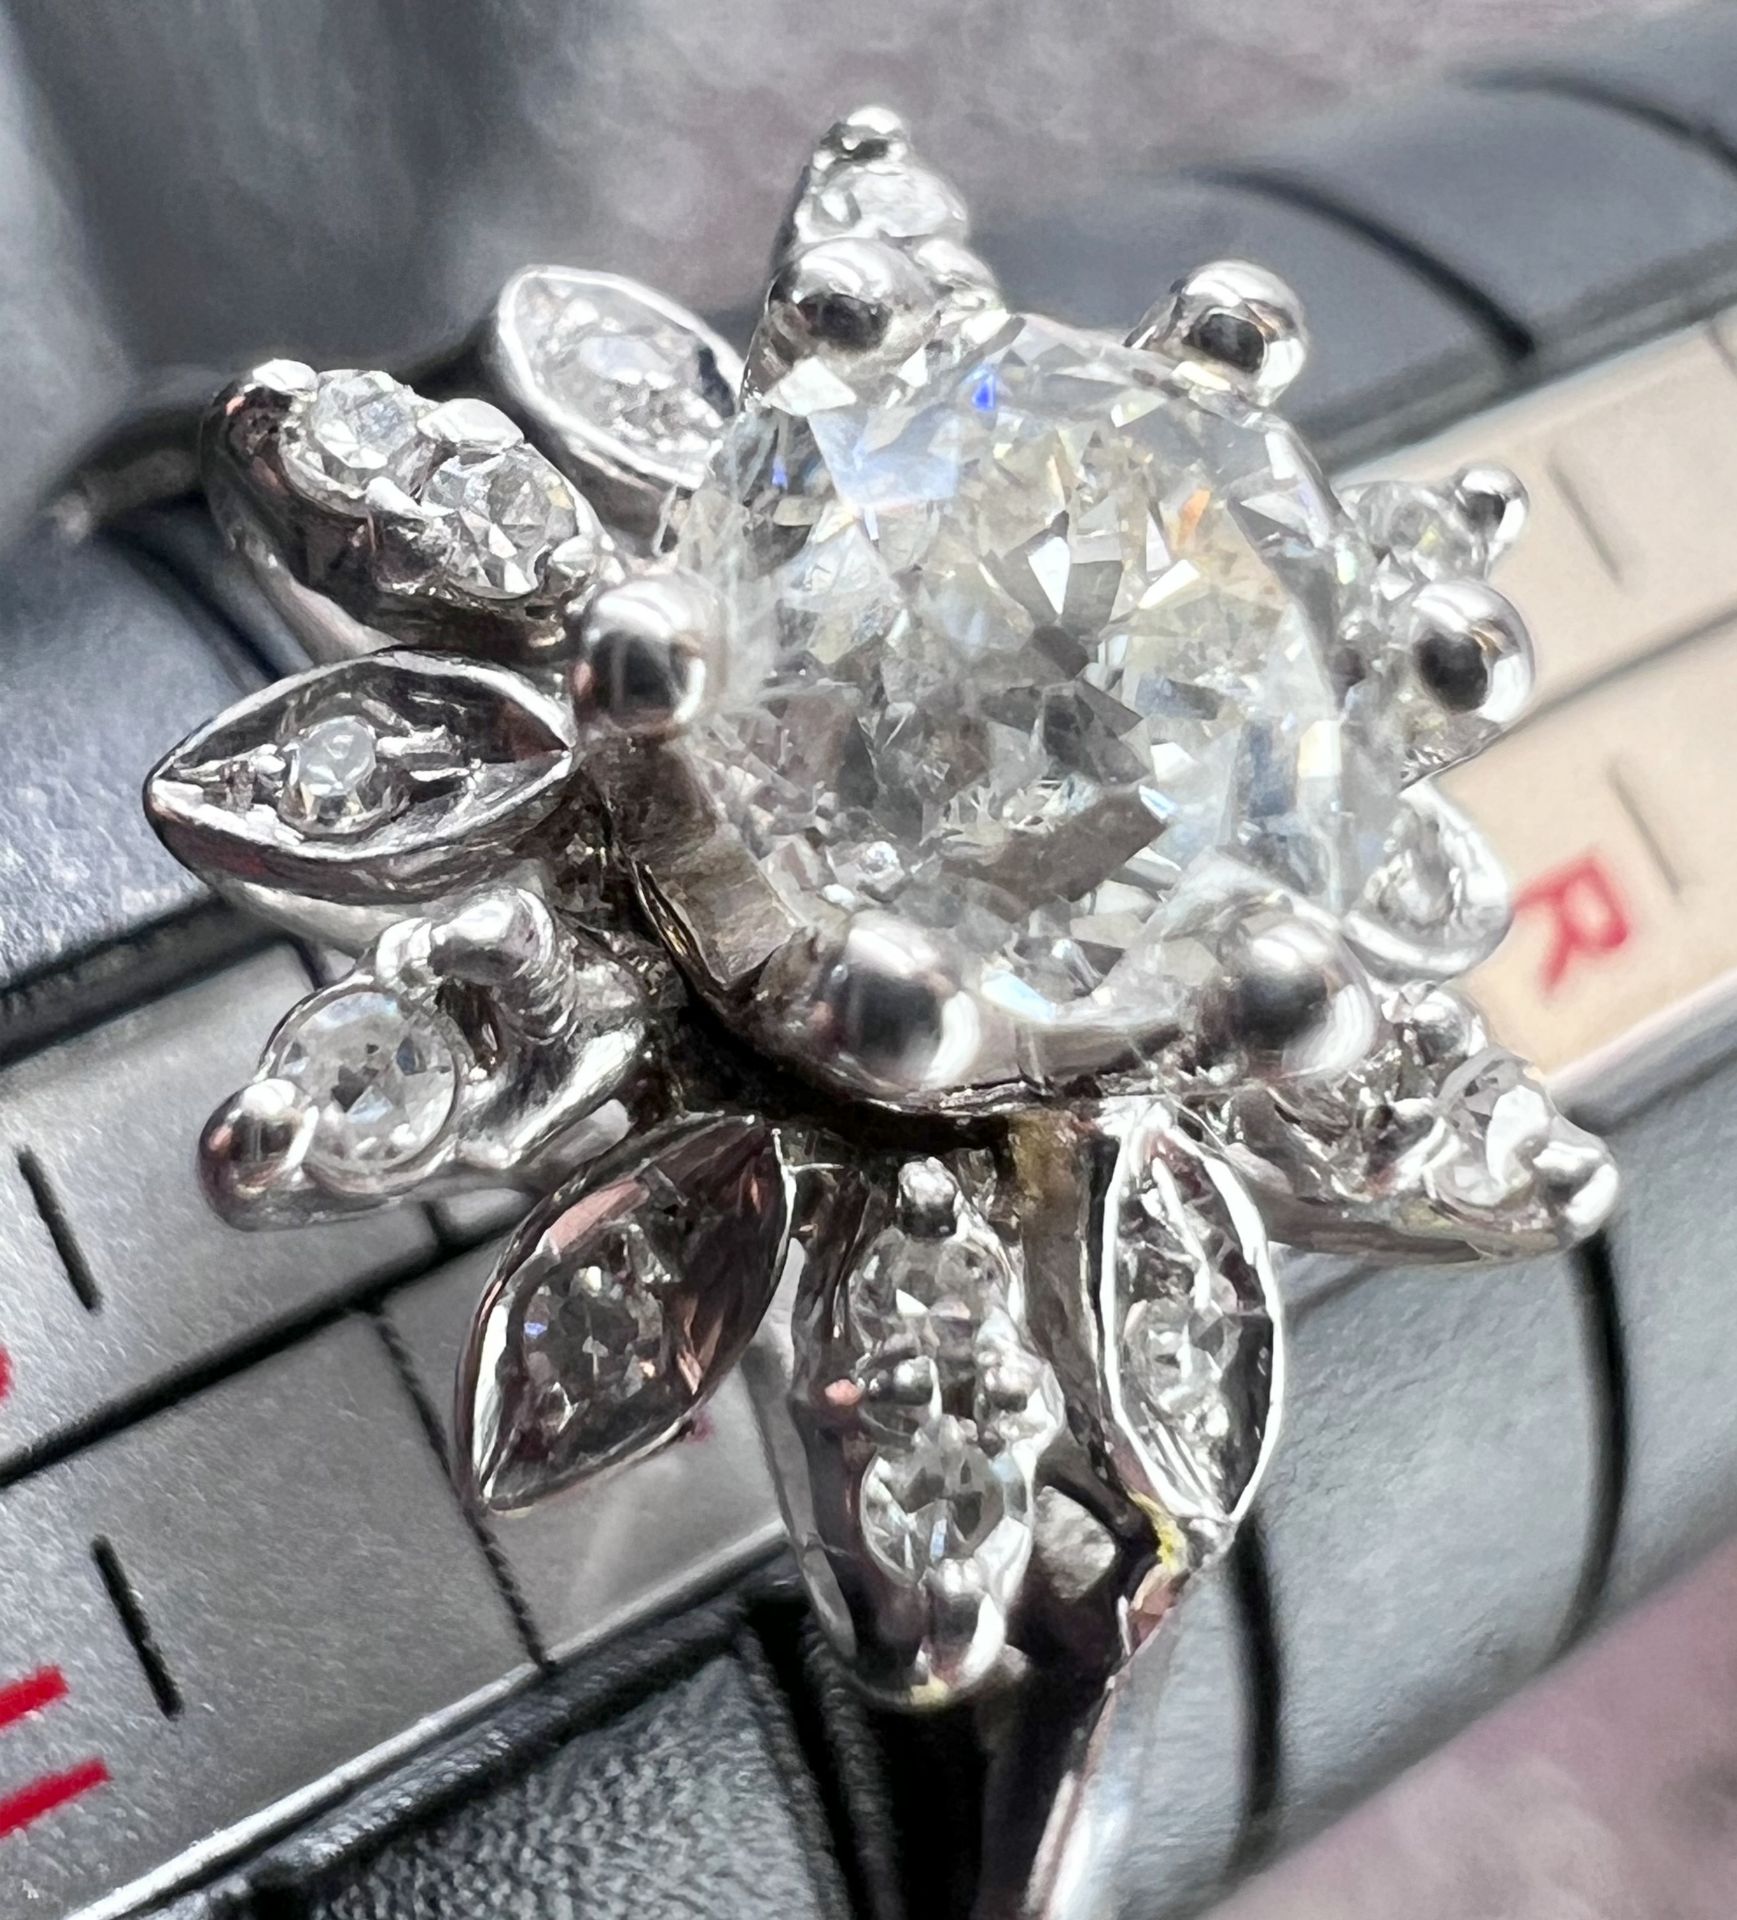 Ladies' ring in flower shape. 585 white gold with 13 diamonds. - Image 4 of 9